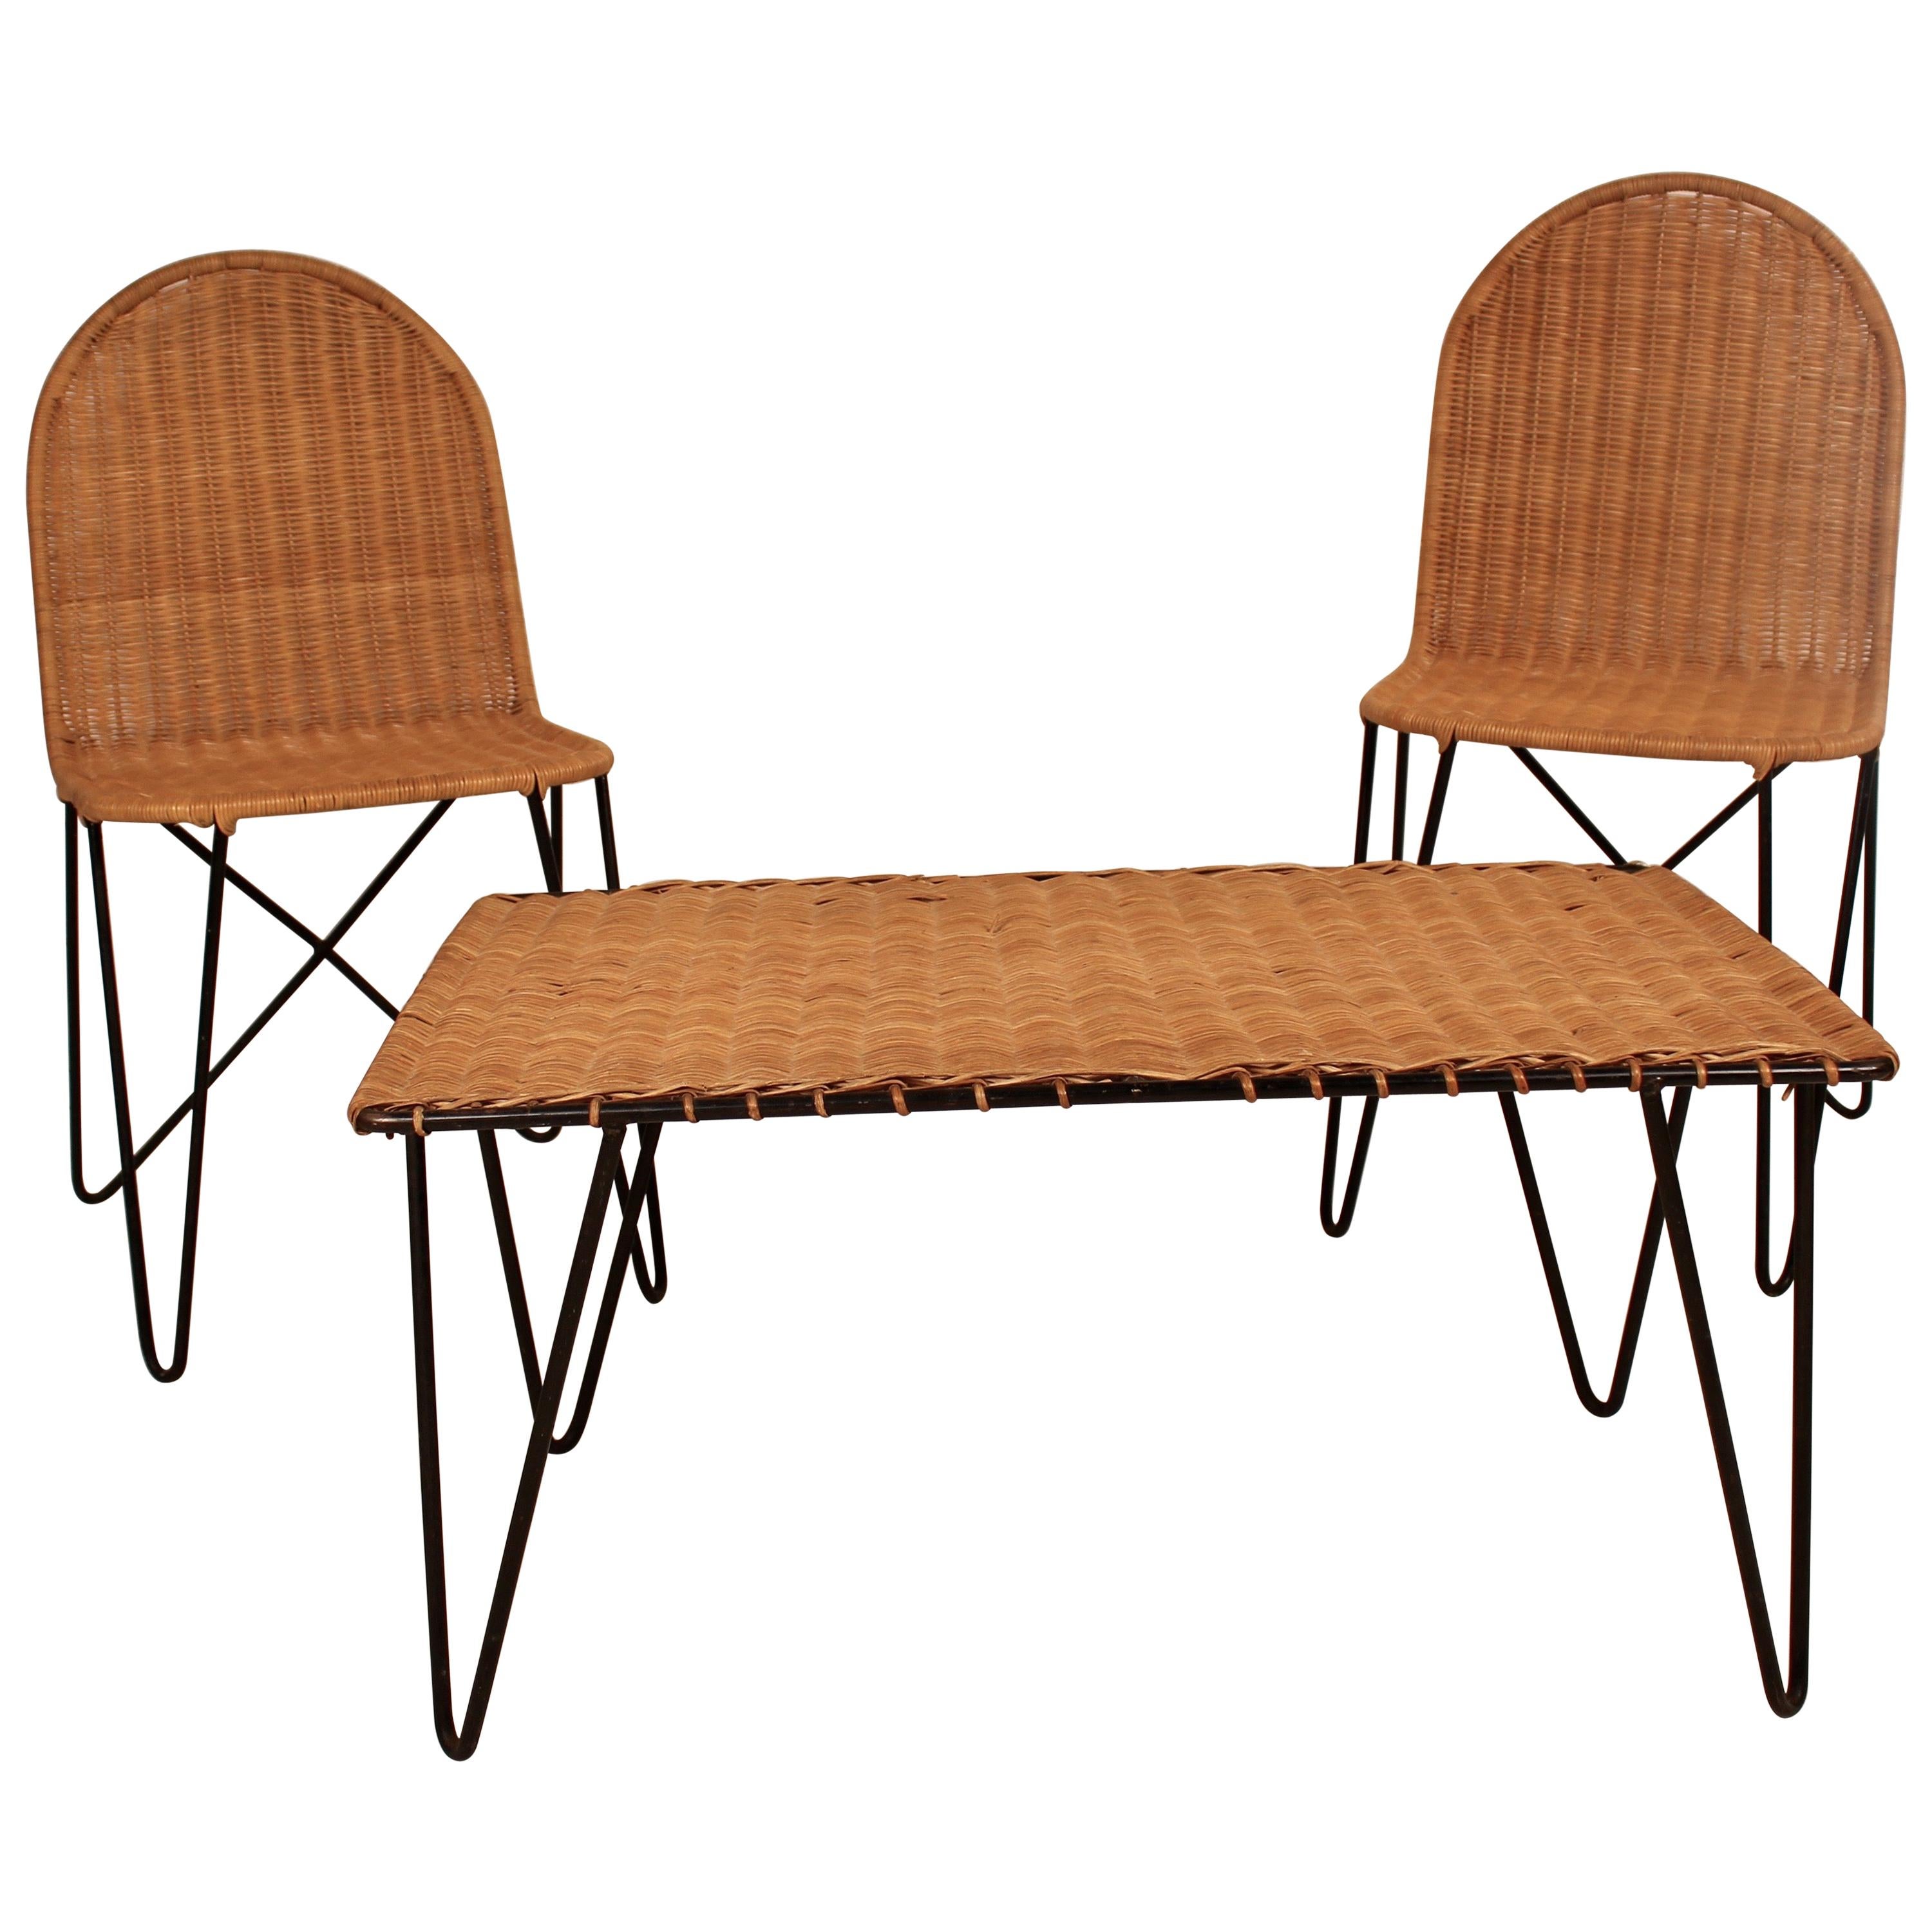 Outdoor Rattan Wicker Set, Coffee Table and 2 Chairs by Raoul Guys, France, 1950